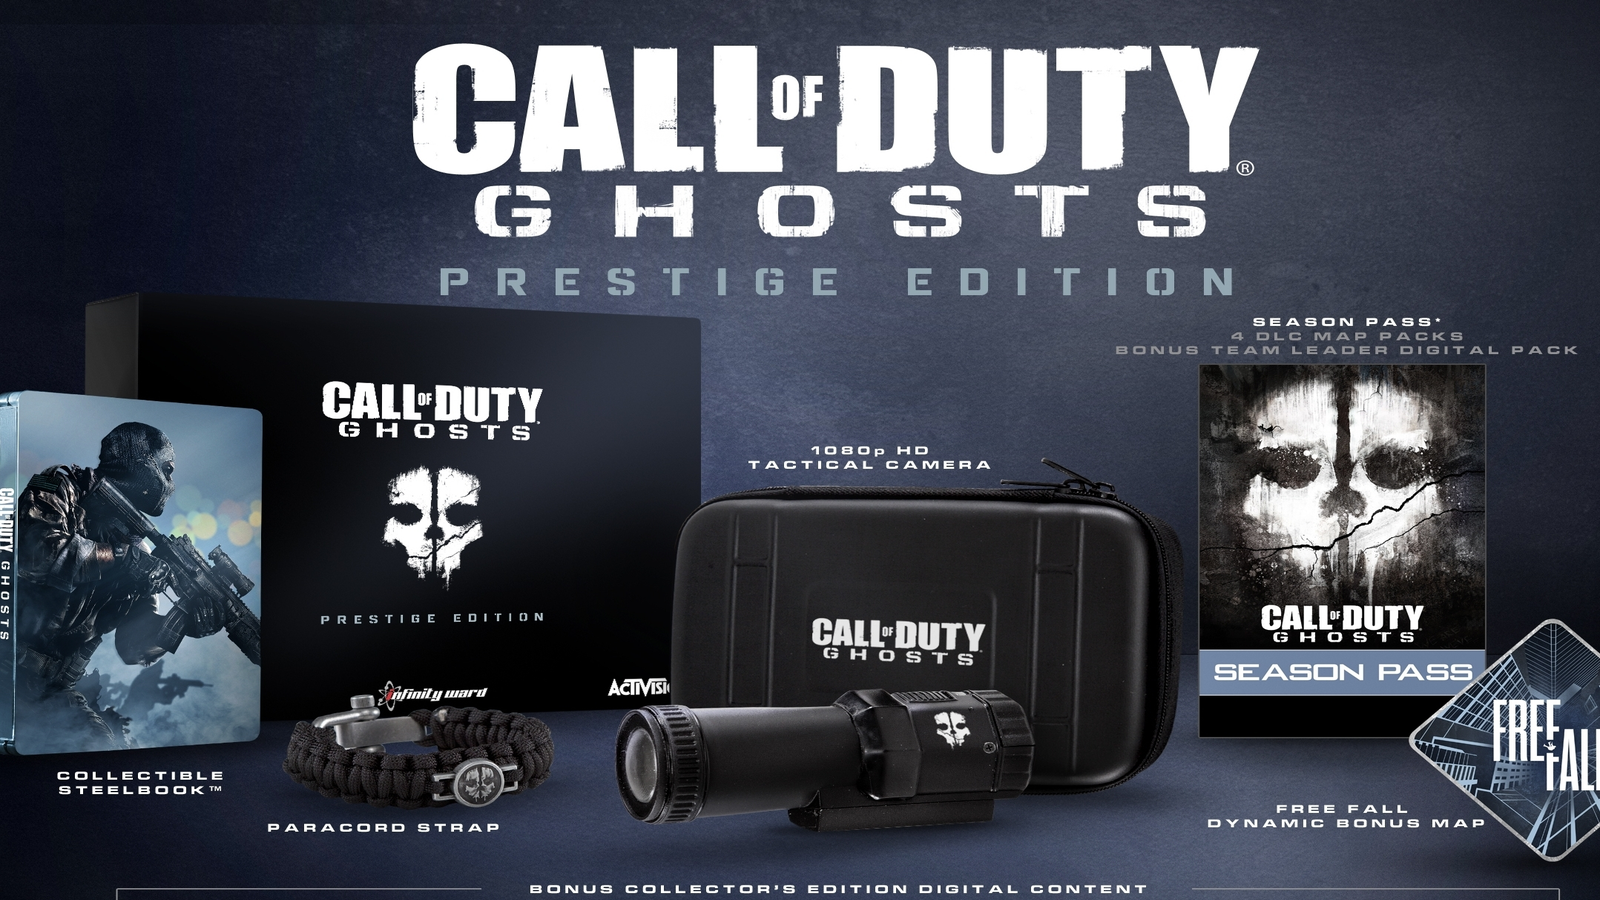 Call of Duty Ghosts Camera